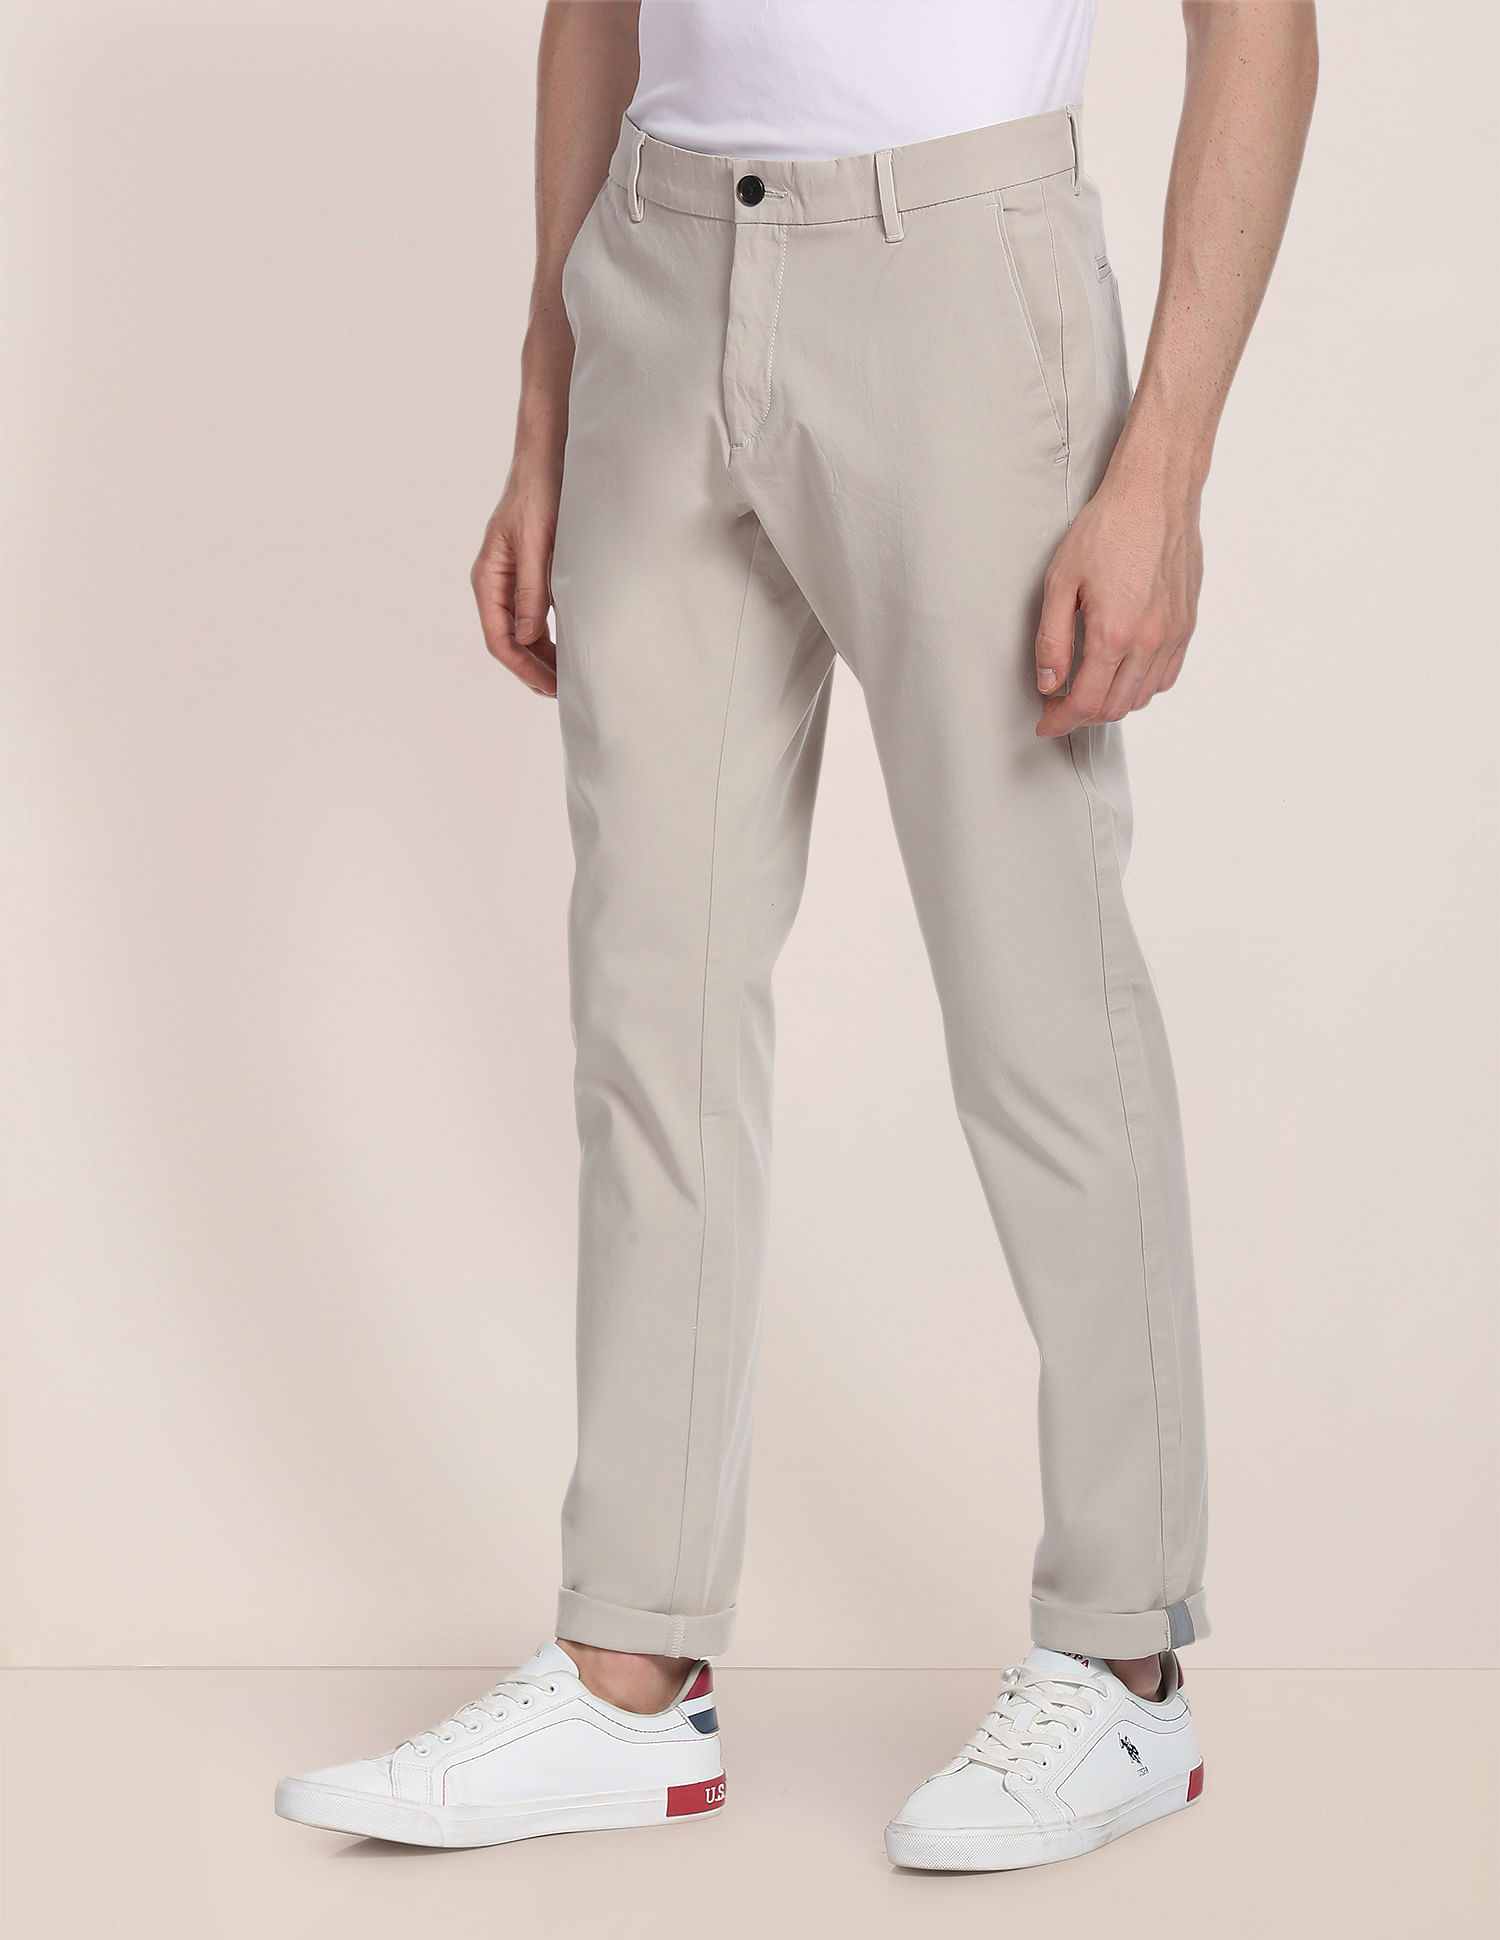 Featherweight Twill Tennis Flat-Front Pants